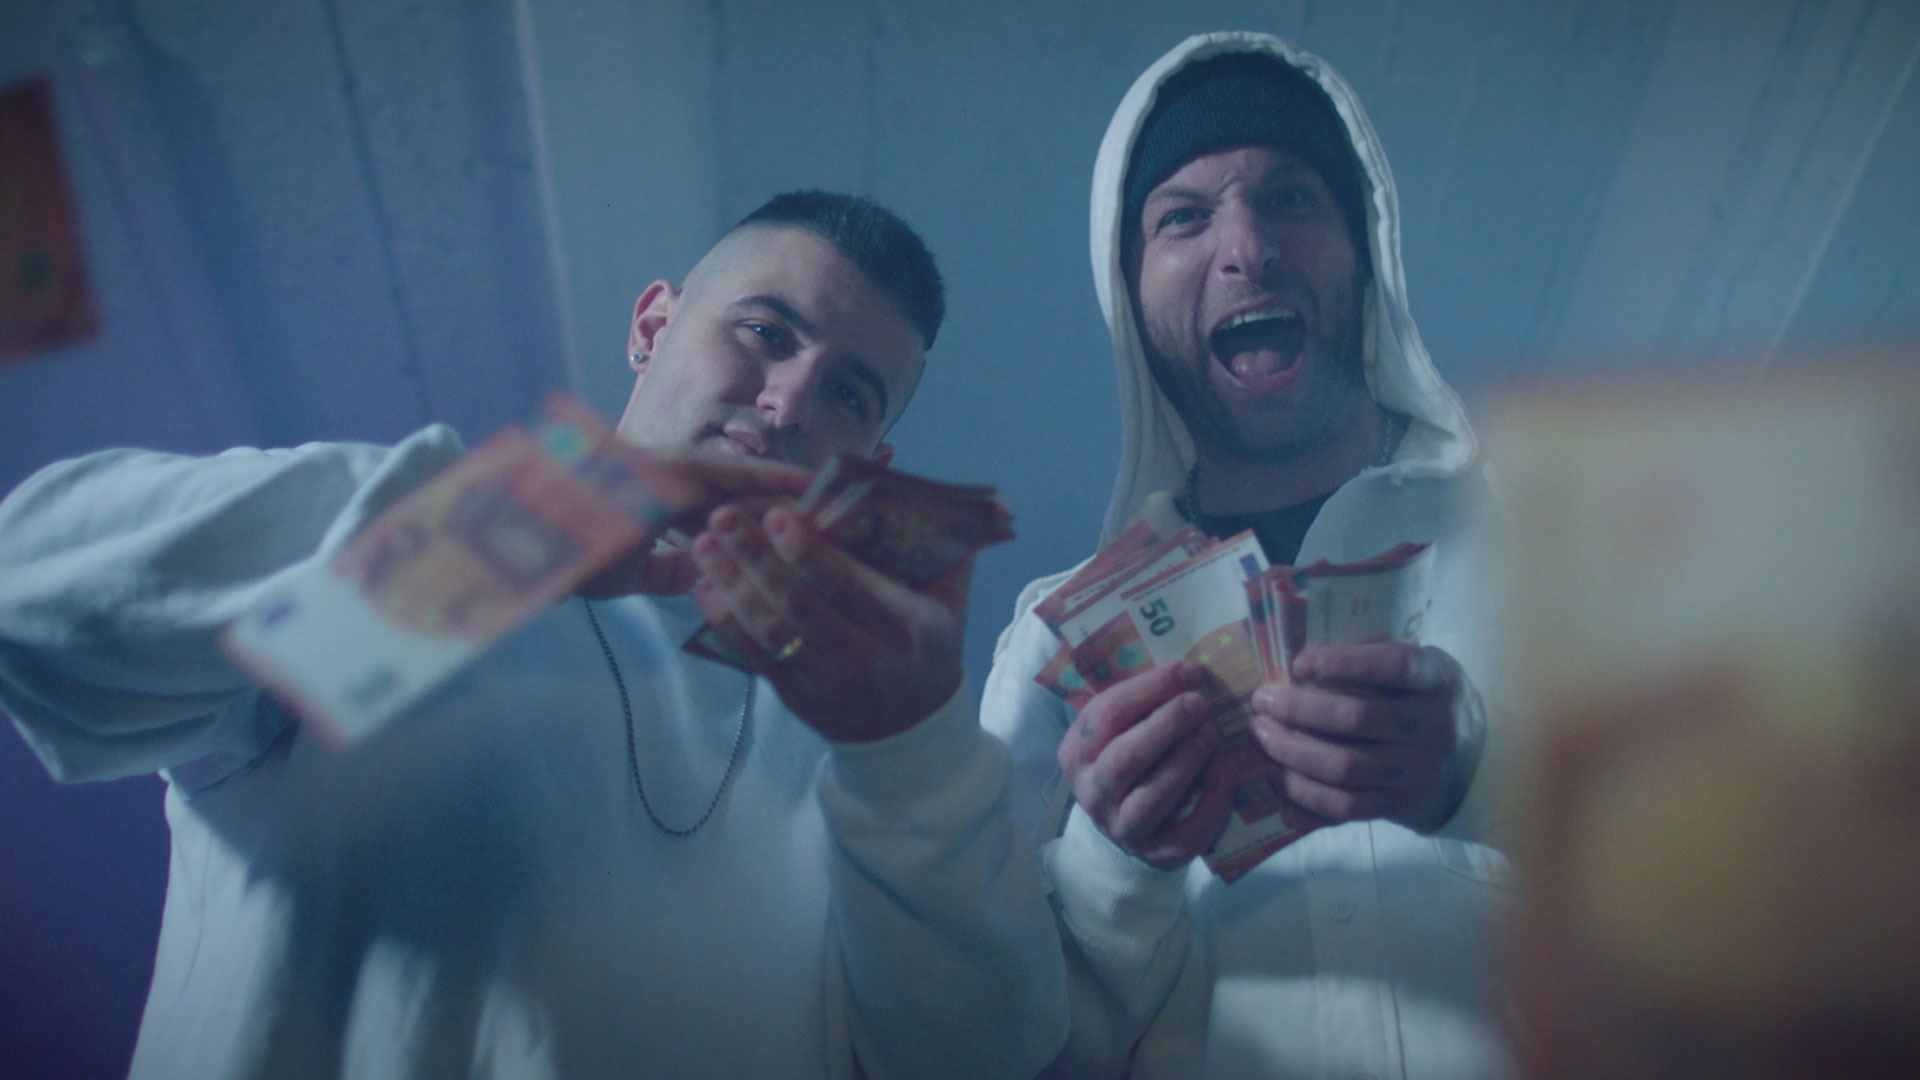 Preview of the trouble video production: "SENSEI ft.CLEMENTINO- CAPIdel RAP"